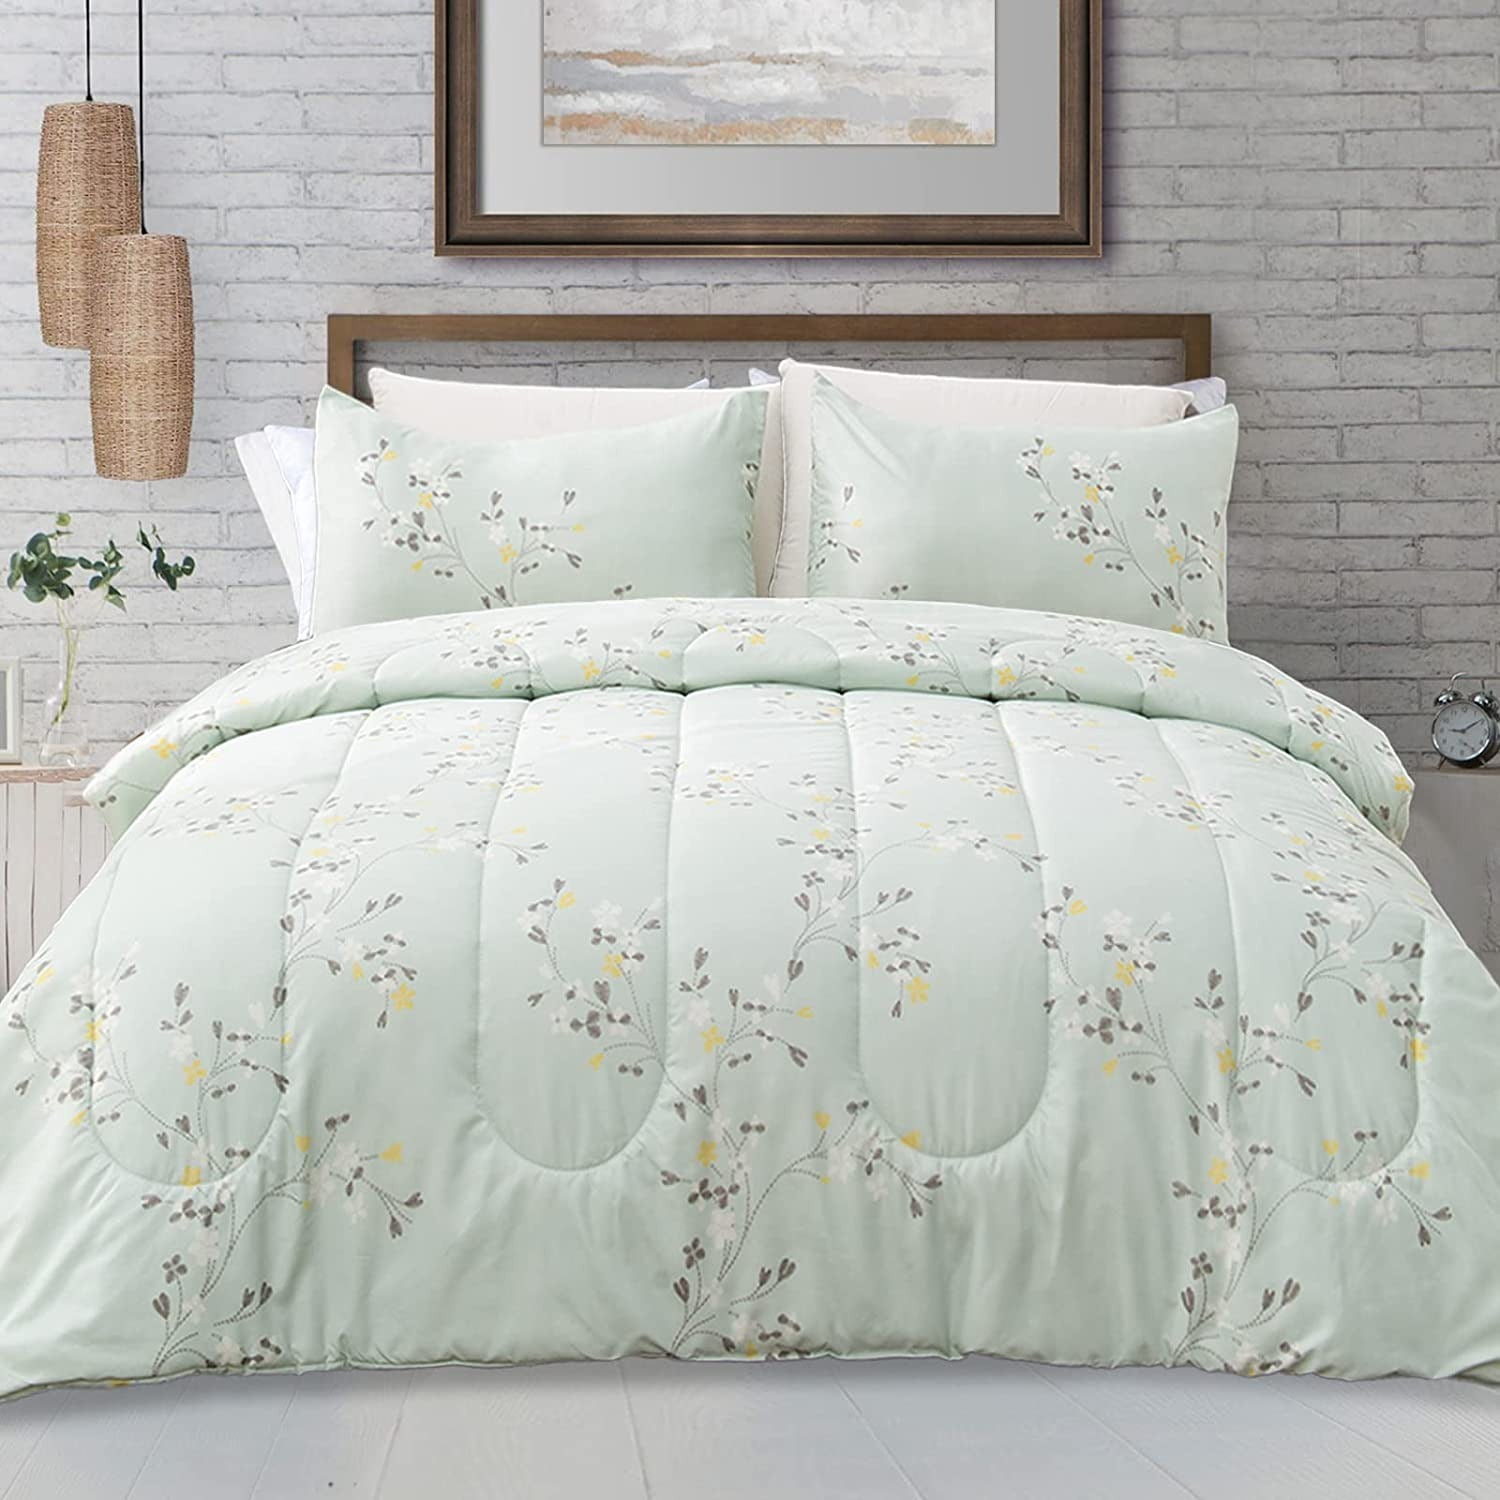 Luxudecor Floral Comforter Set Queen Size Green Floral Pattern Bedding  Comforter Soft Microfiber 7 Pieces Bed in a Bag (1 Comforter, 2 Pillow  Shams, 1